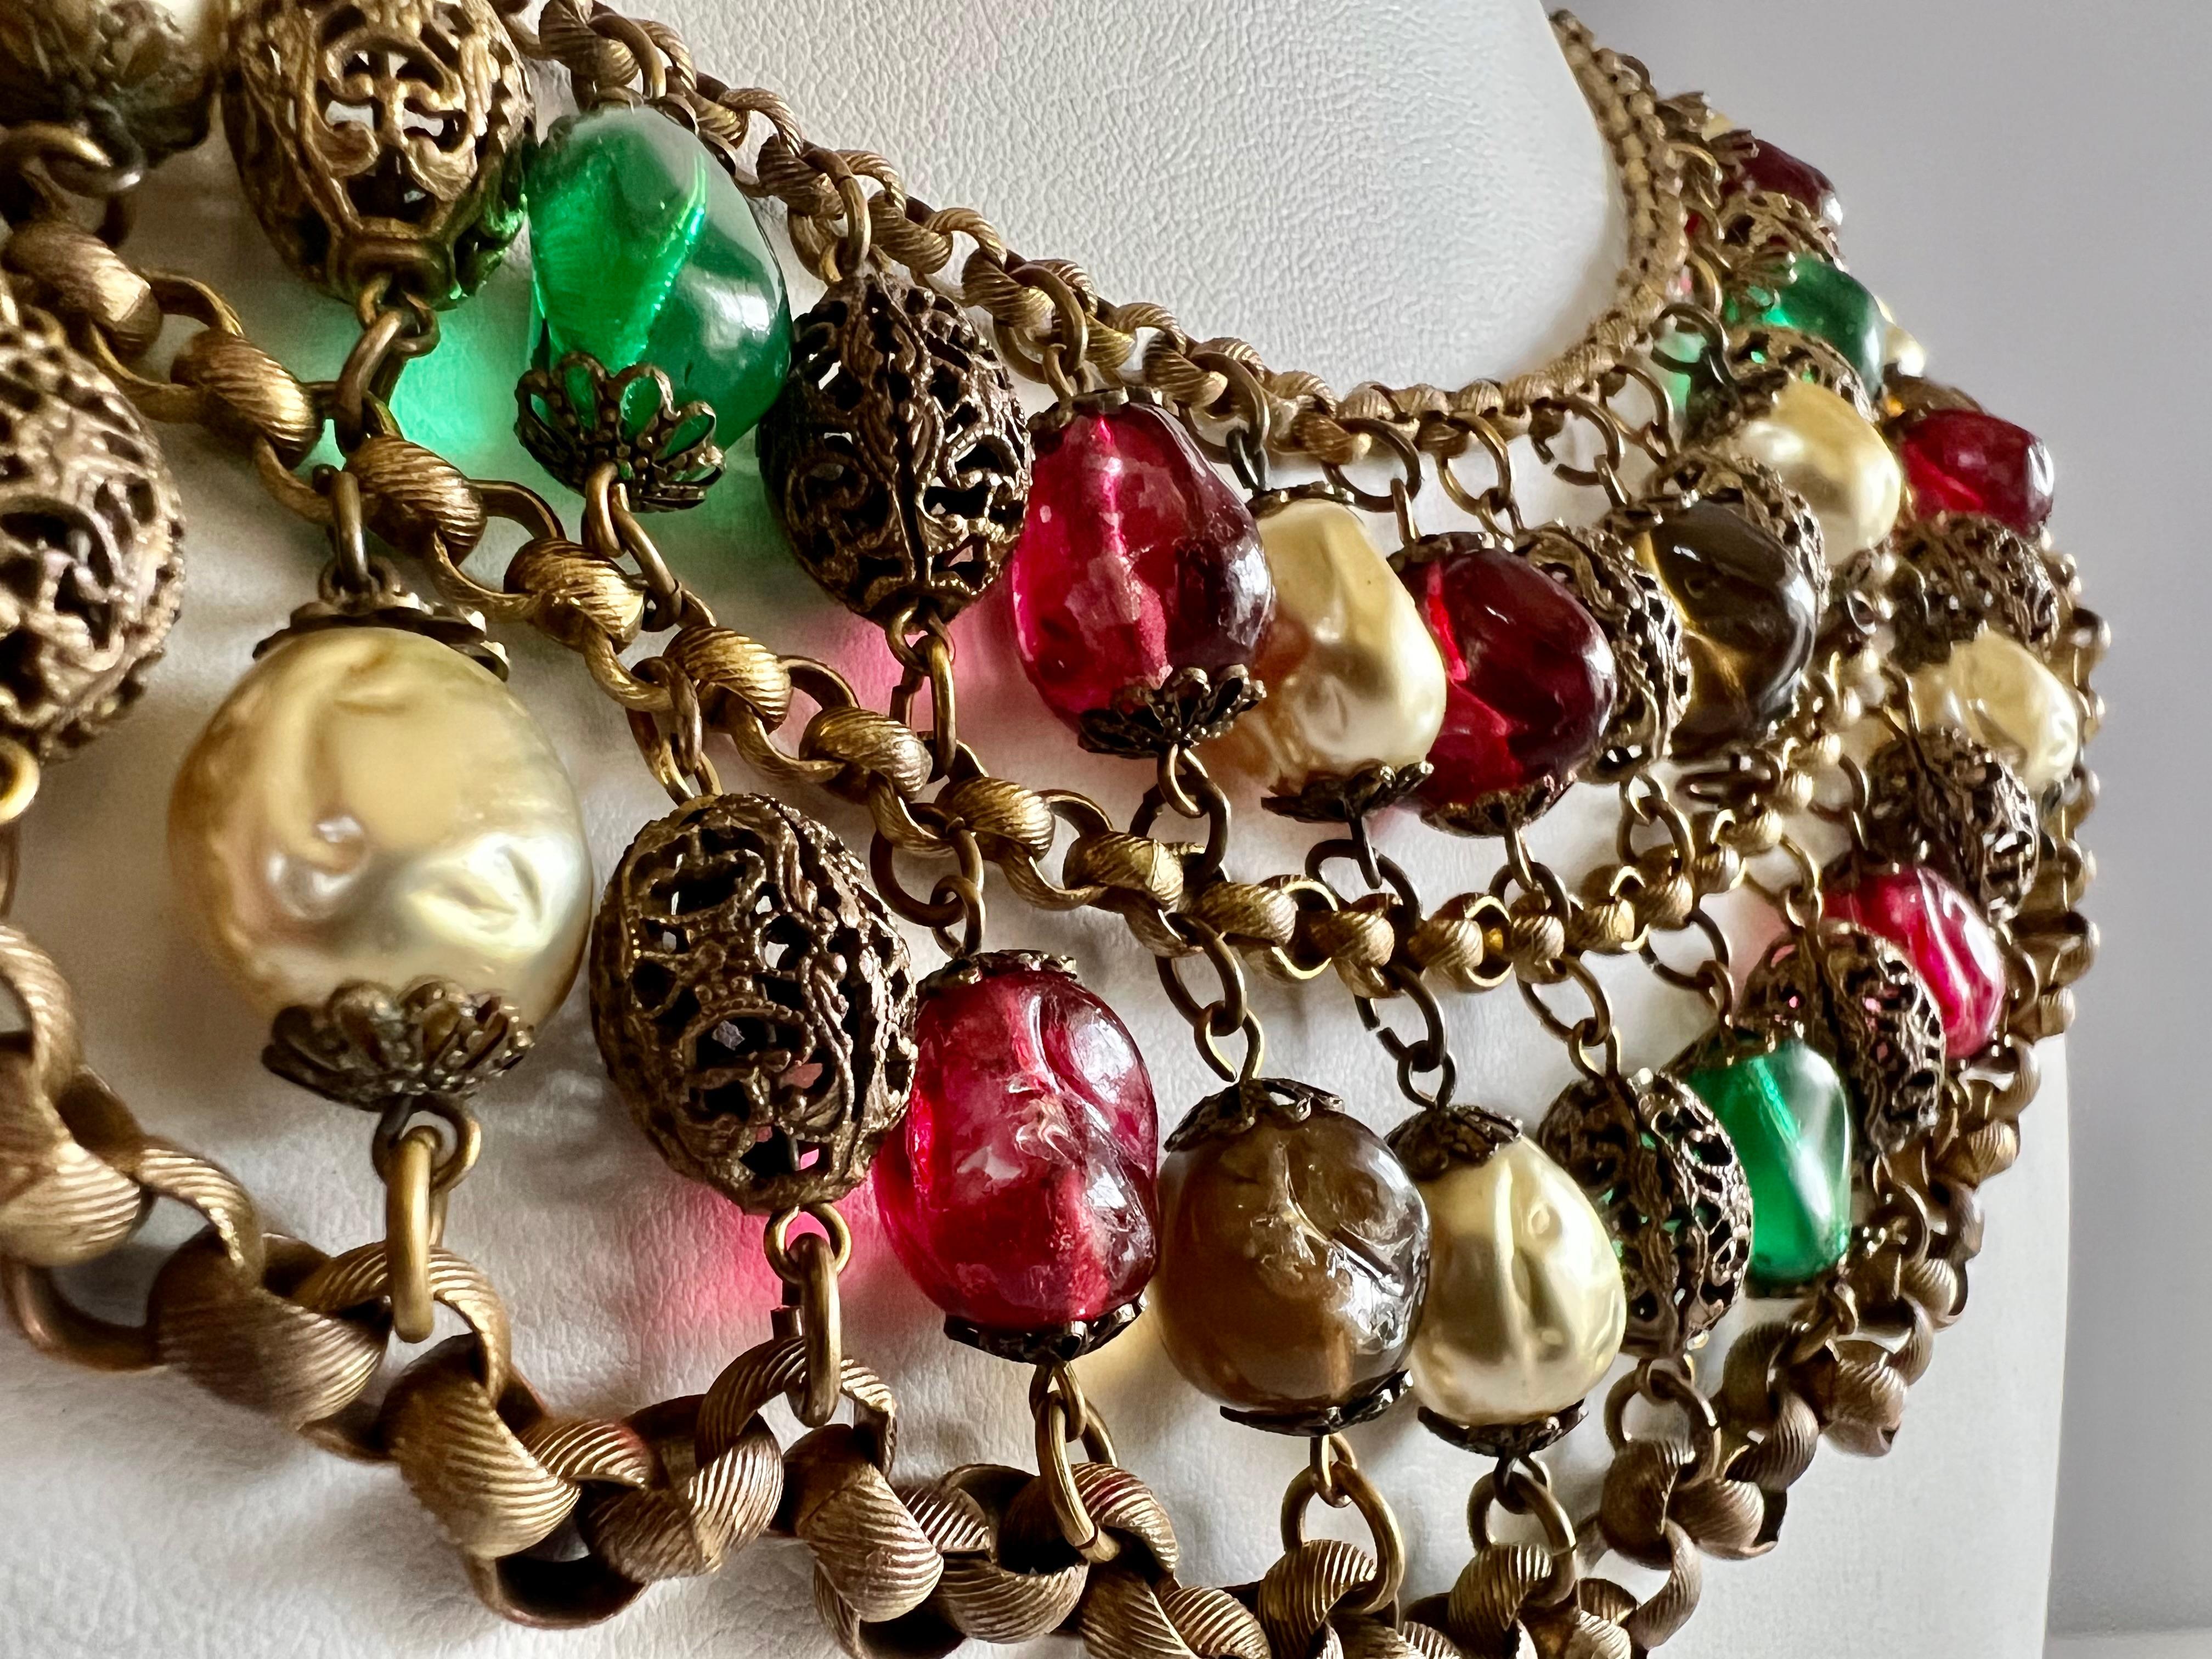 Exquisite and scarce Coco Chanel collar - the necklace is comprised of four rows of thick gilt metal chain interwoven with gilt metal filigree beads 